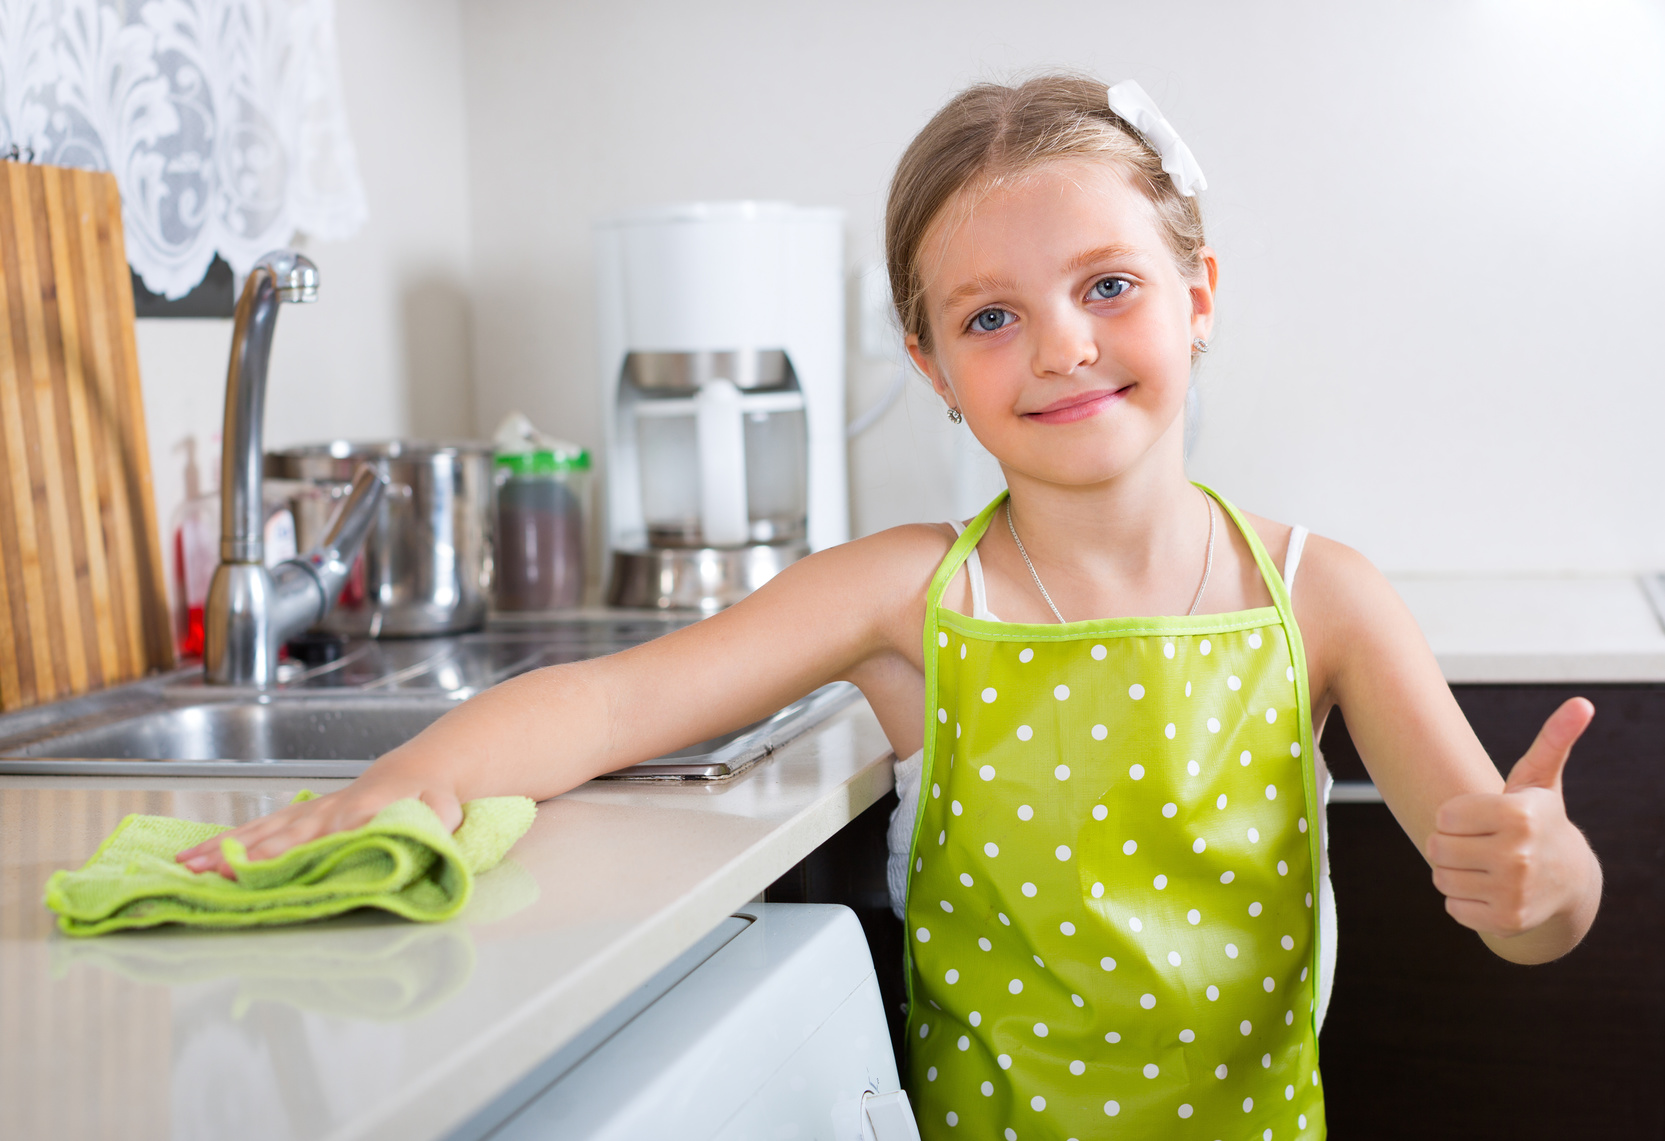 household chores for kids - girl wiping kitchen counter